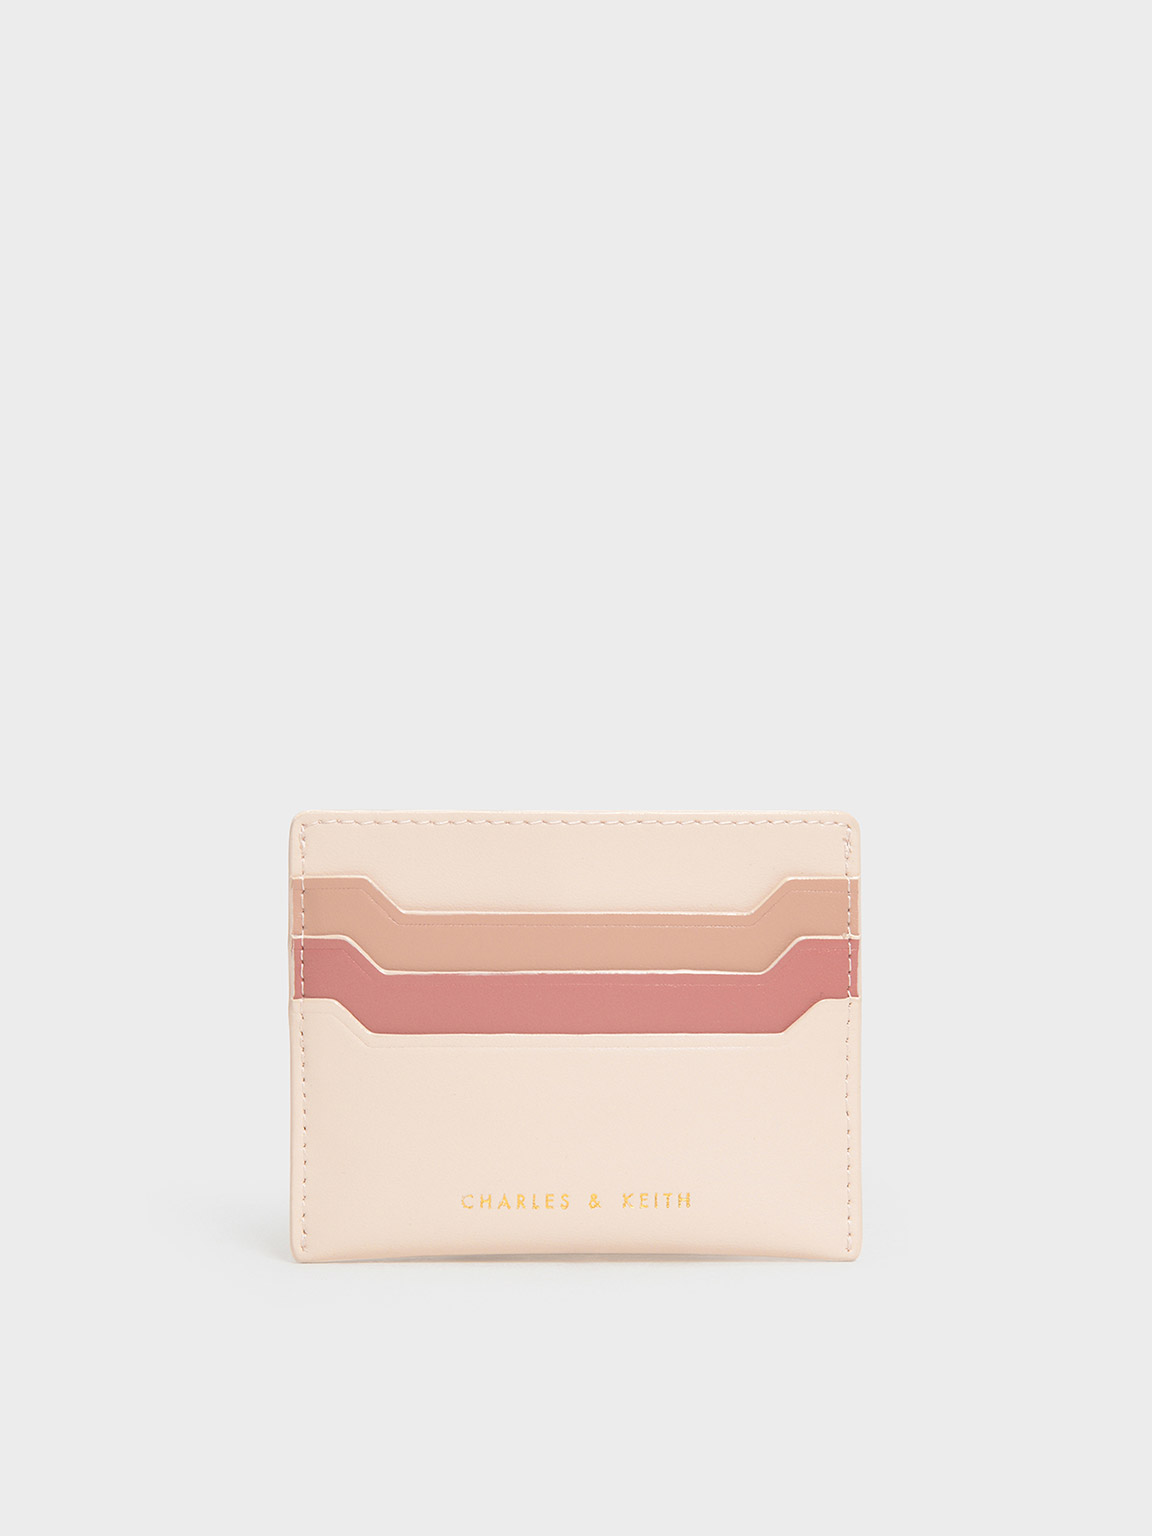 Shop Charles&Keith Faux Fur Street Style Plain Logo Card Holders  (CH1328DW20618, CH1328DW20620, CH1328DW20622, CH1328DW20619, CH1328DW20621)  by AtelierHappiness